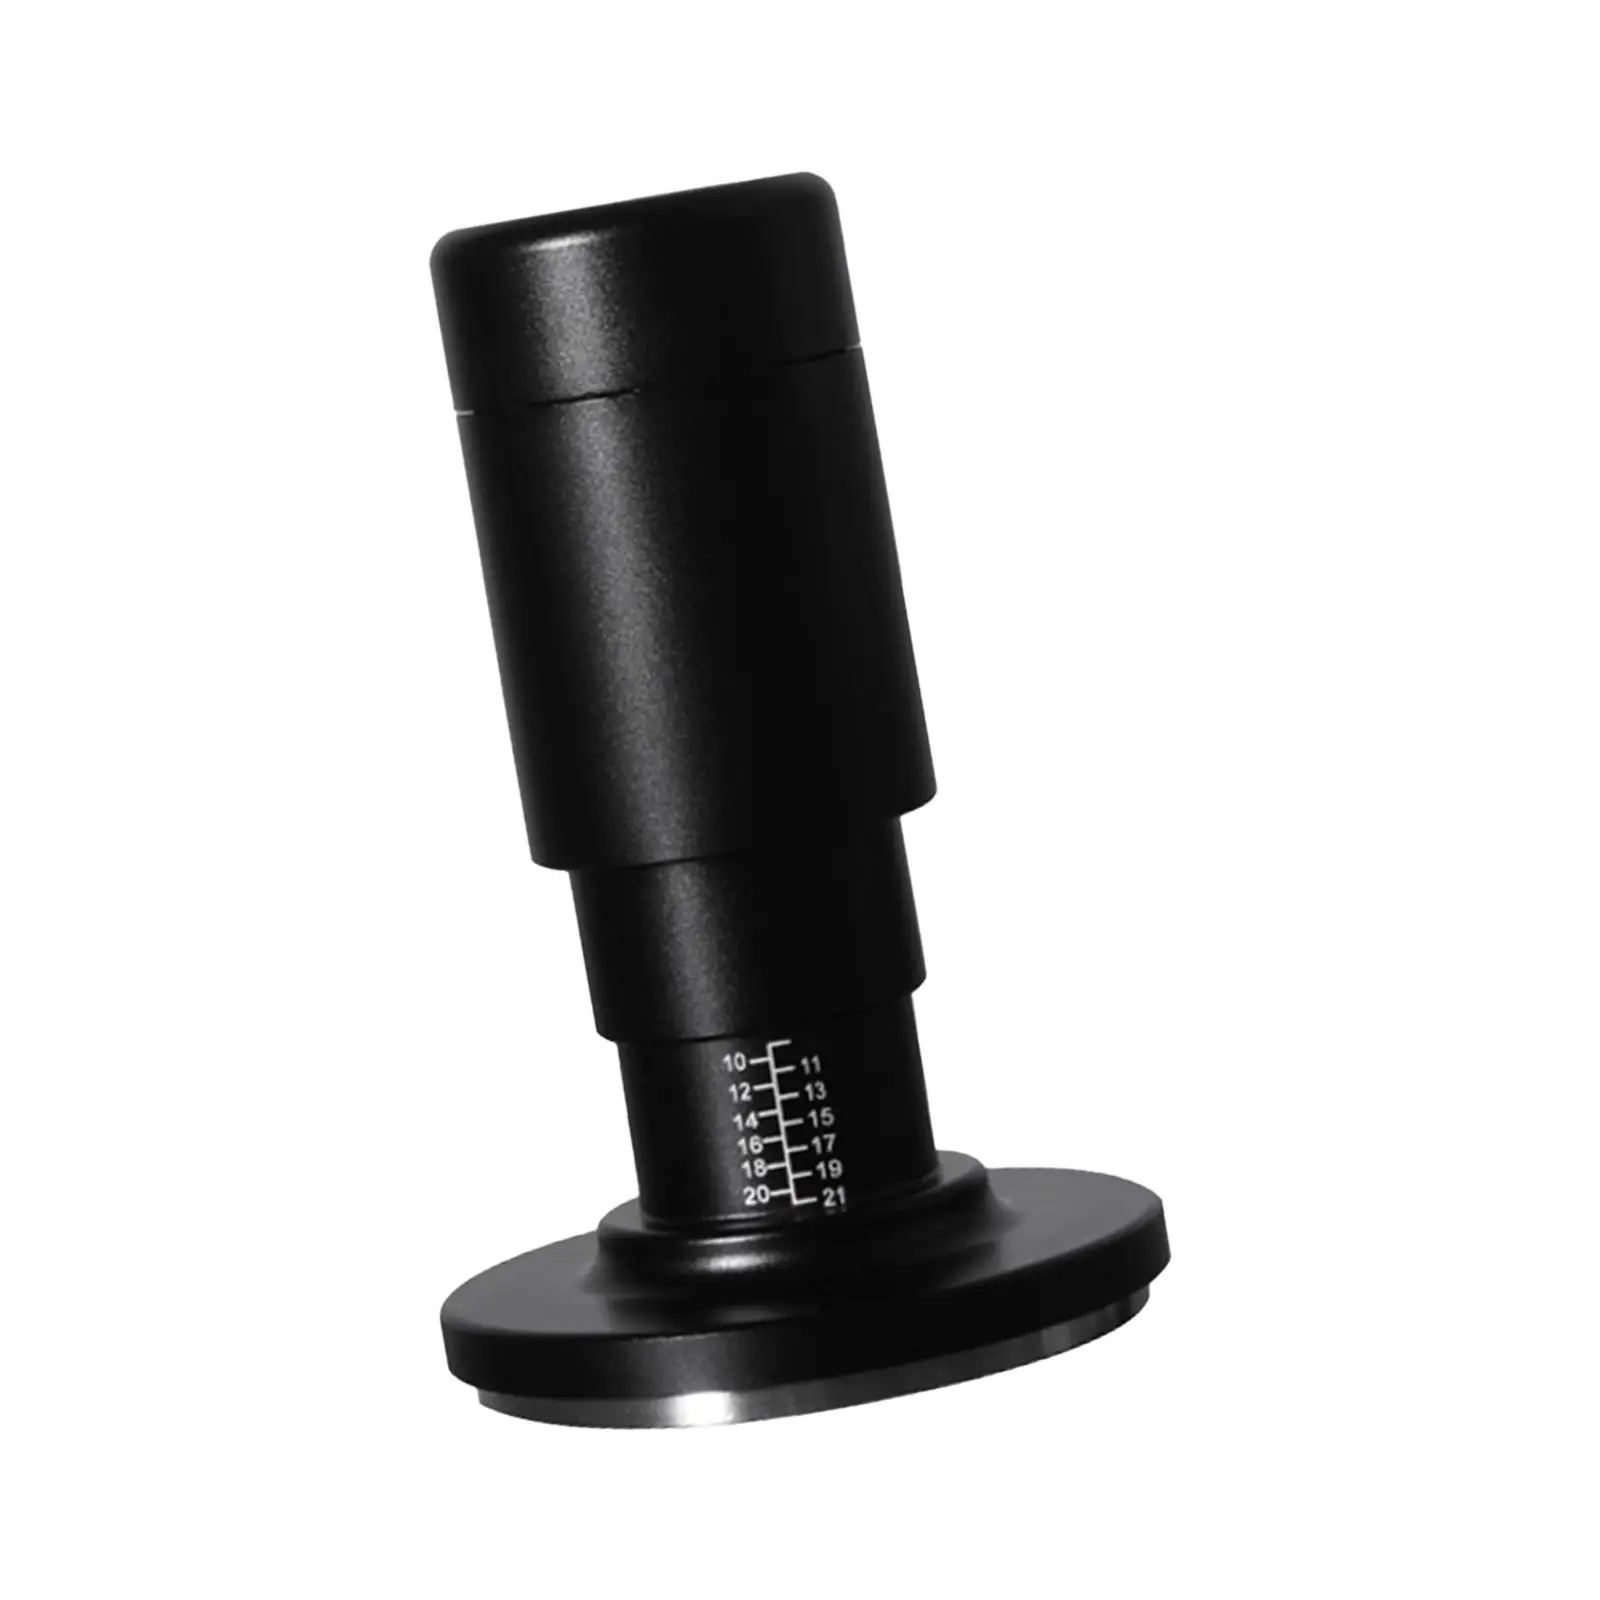 Coffee Tamper and Espresso Distribution Tool Coffee Machine Accessories 2 in 1 for Shop Office Espresso Home